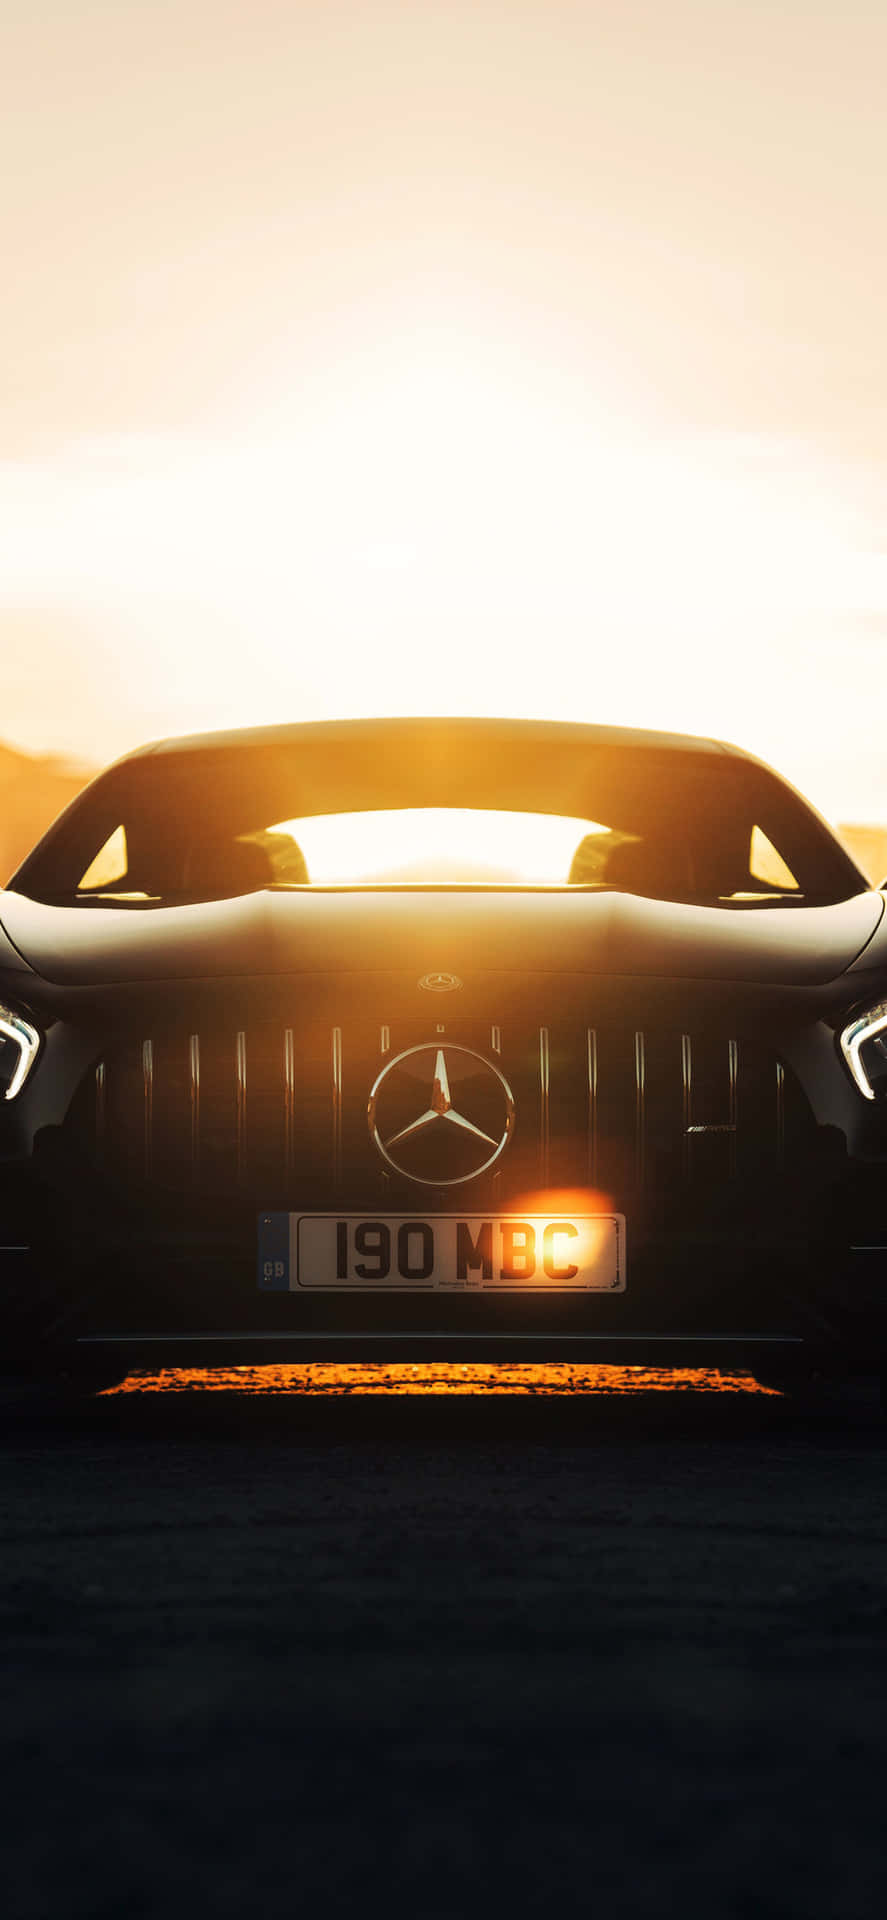 Iphone X Amg Gt-r Background In Sunlight